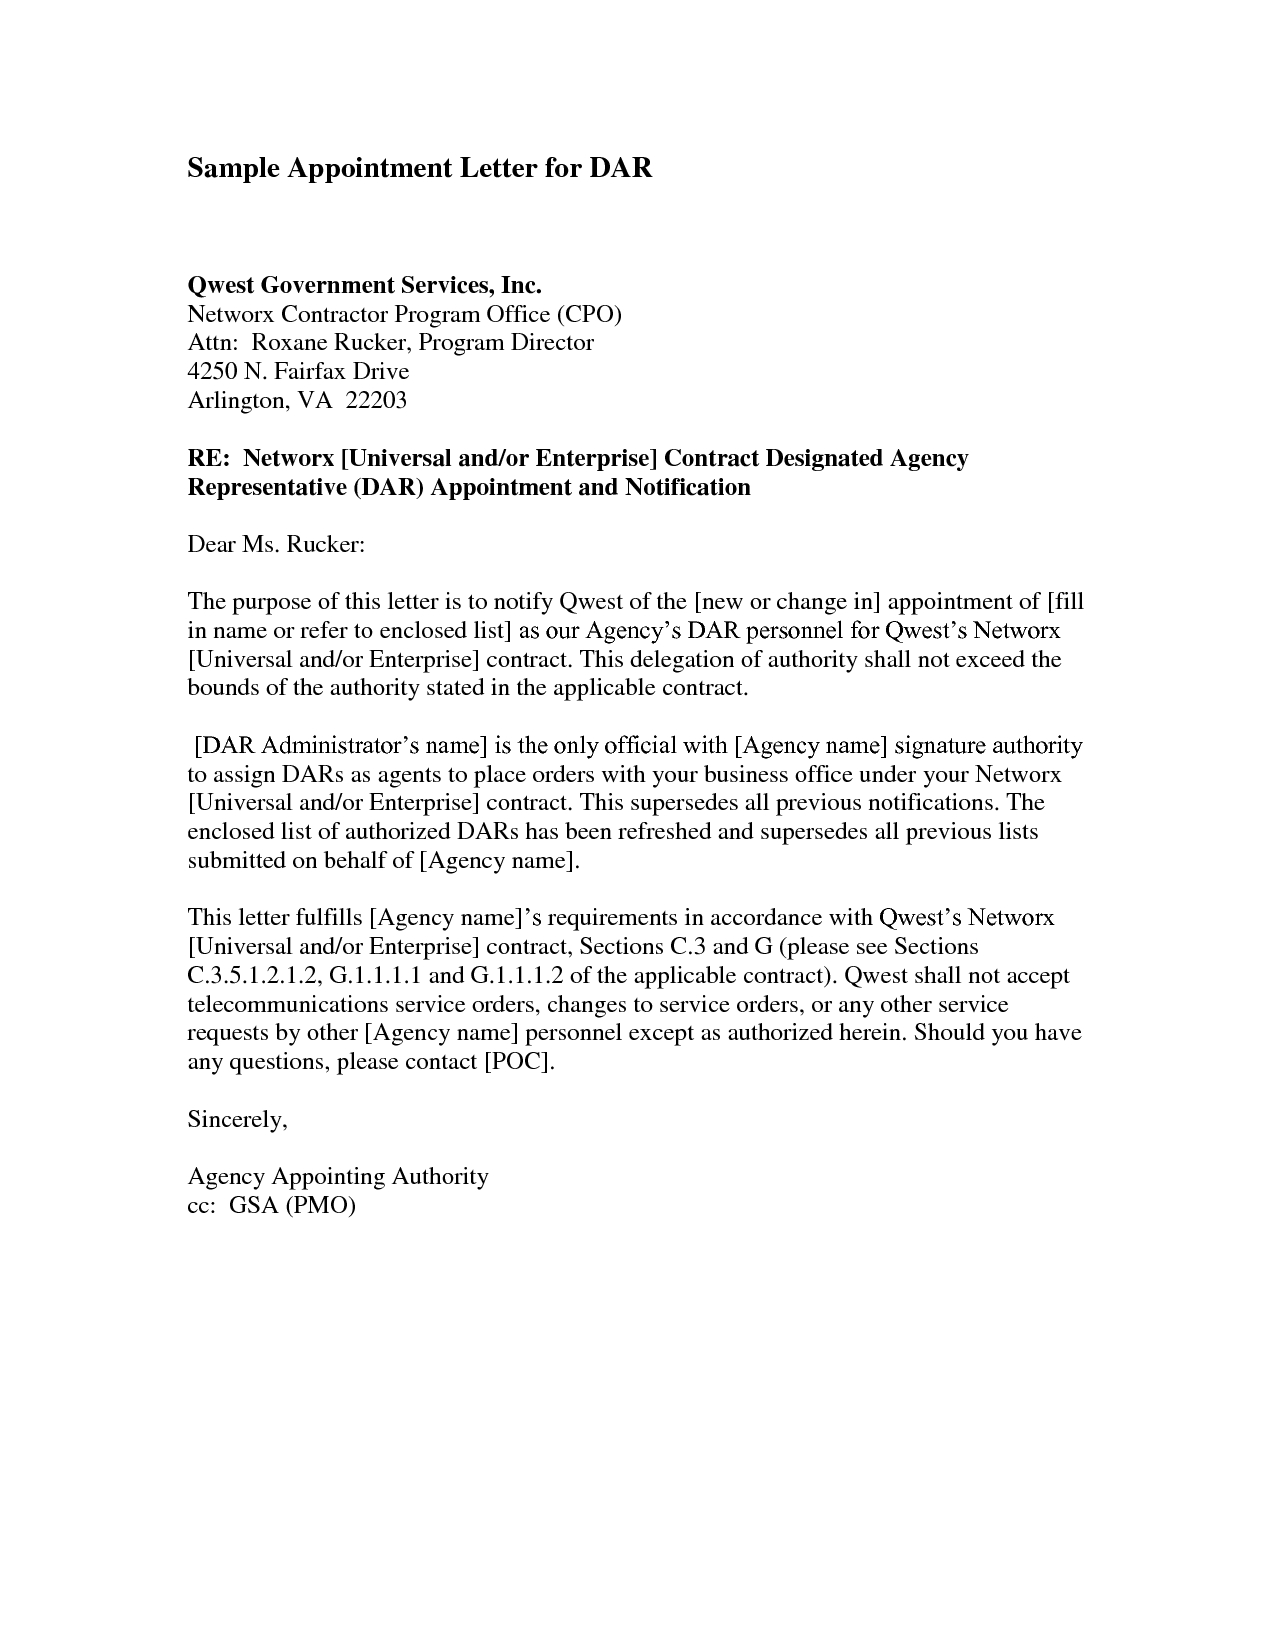 Rental Reference Letter From Friend Template - Trustee Appointment Letter Director Trustee is Appointed or